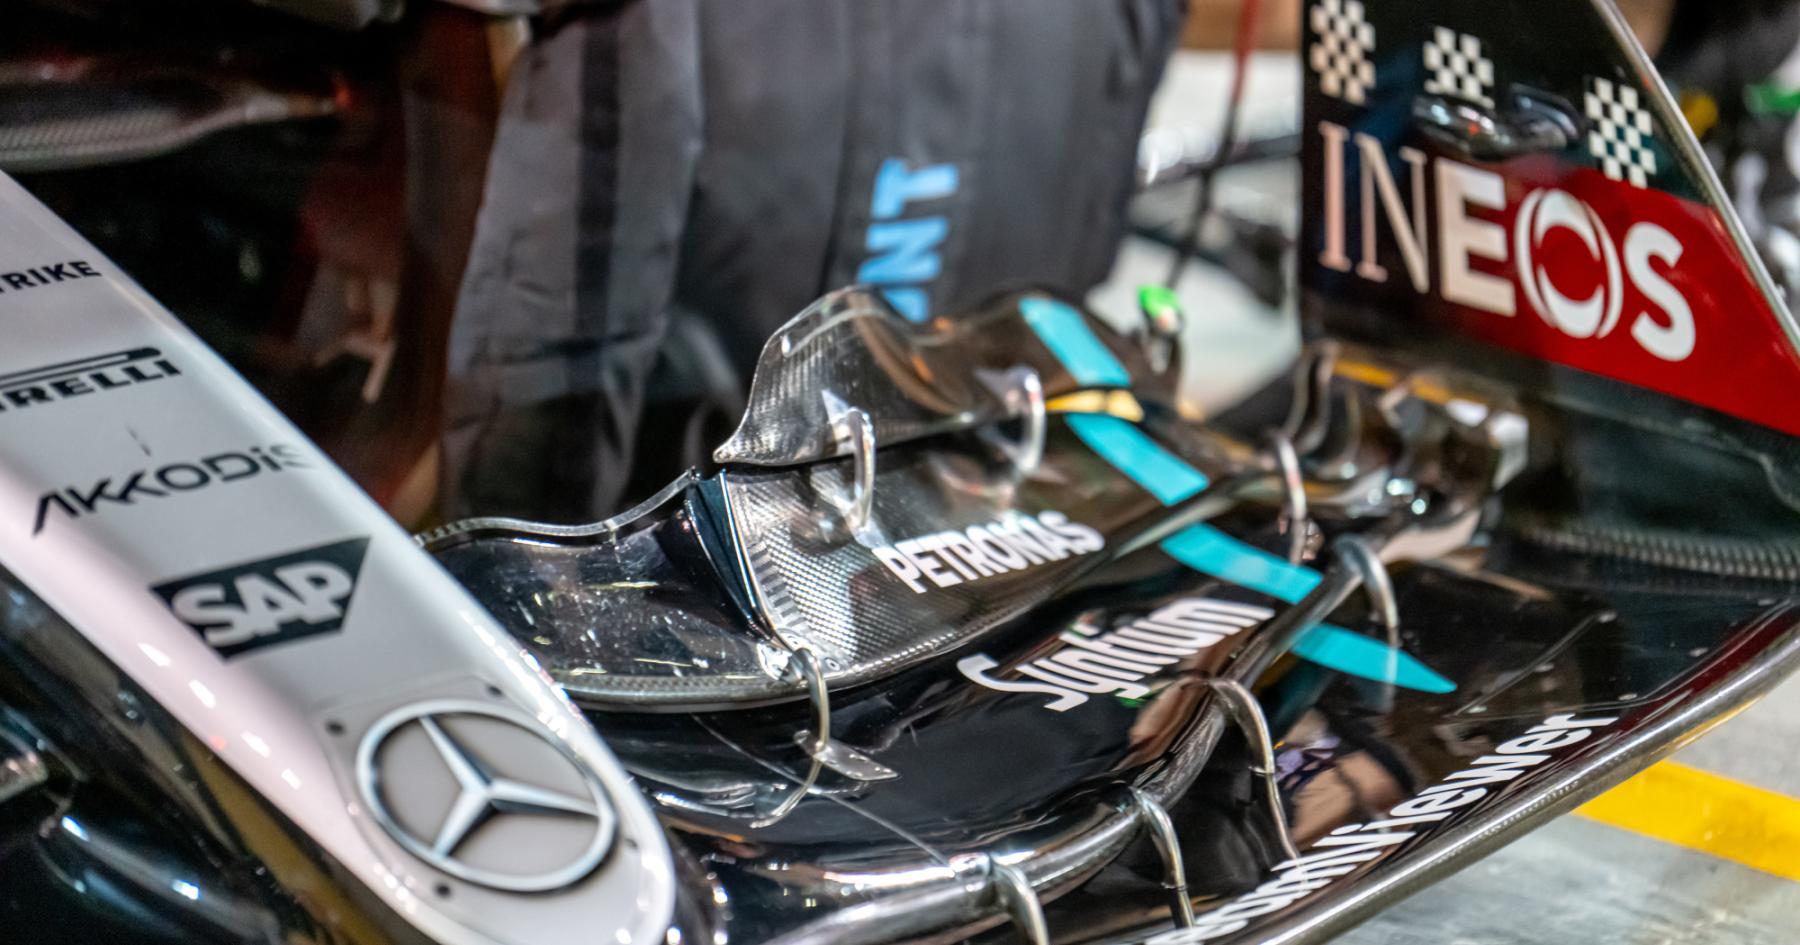 Mercedes innovation 'at the boundary' of F1 rules